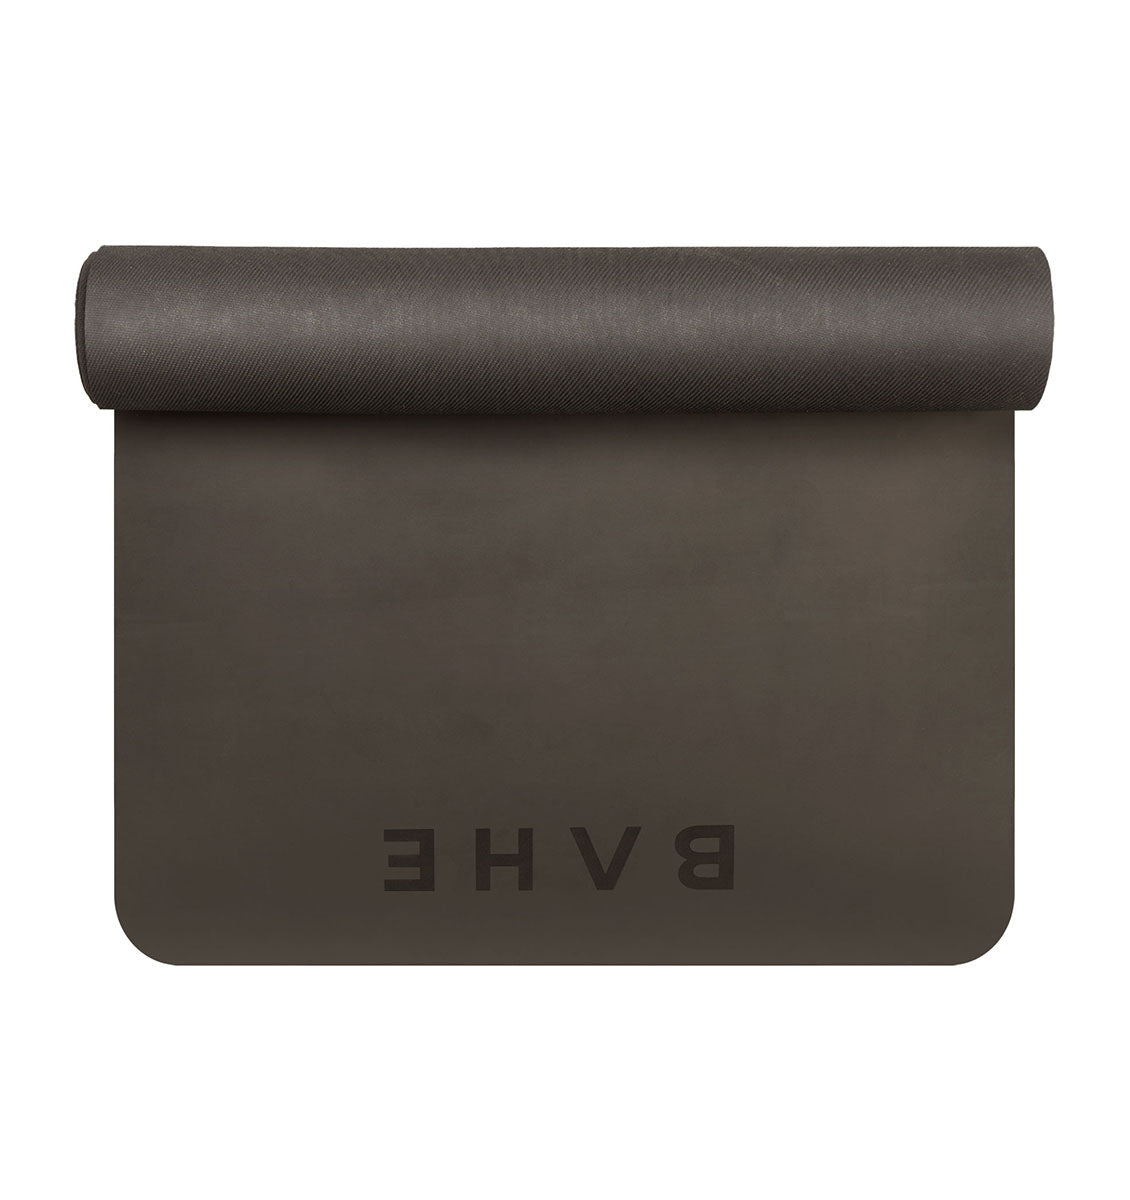 BAHE Power Hold Yoga Mat - 4mm - Anthracite - 3